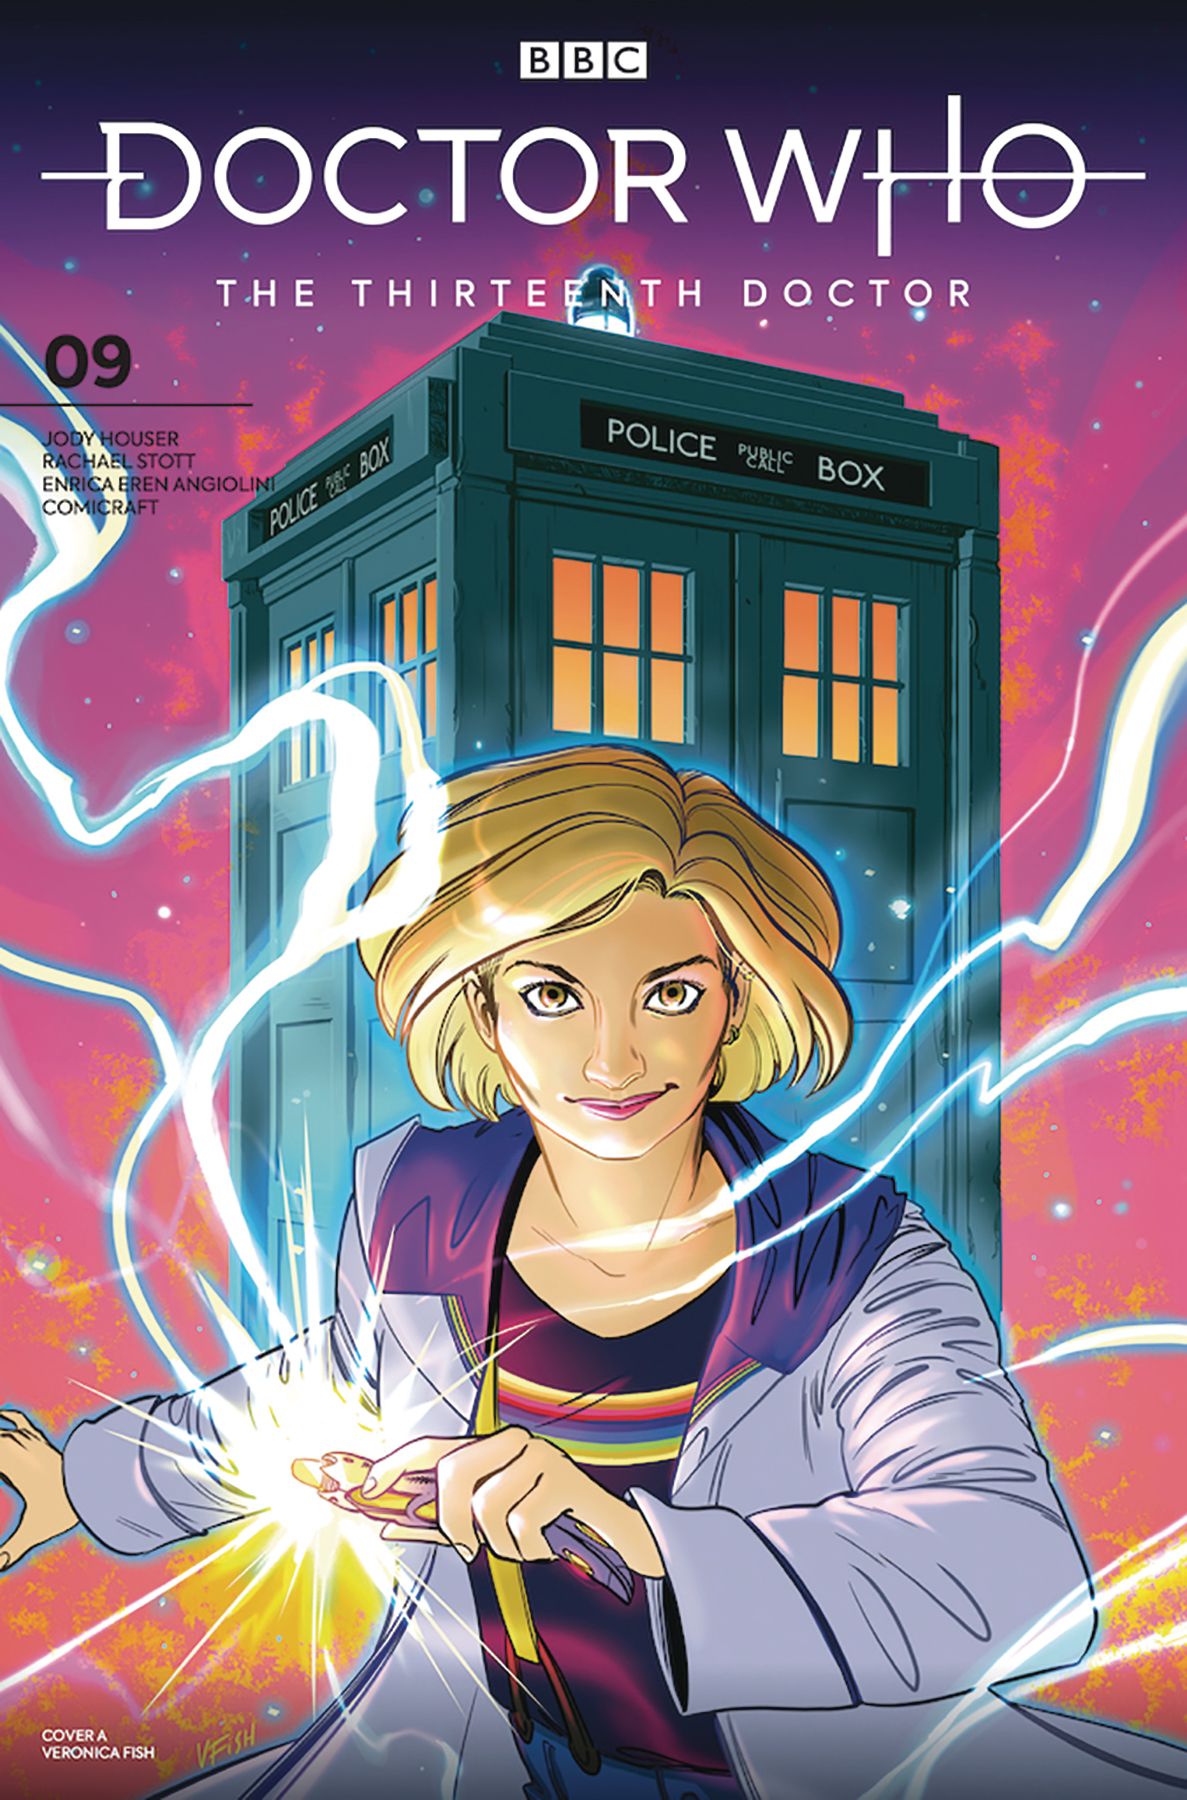 Doctor Who: The Thirteenth Doctor #9 Comic